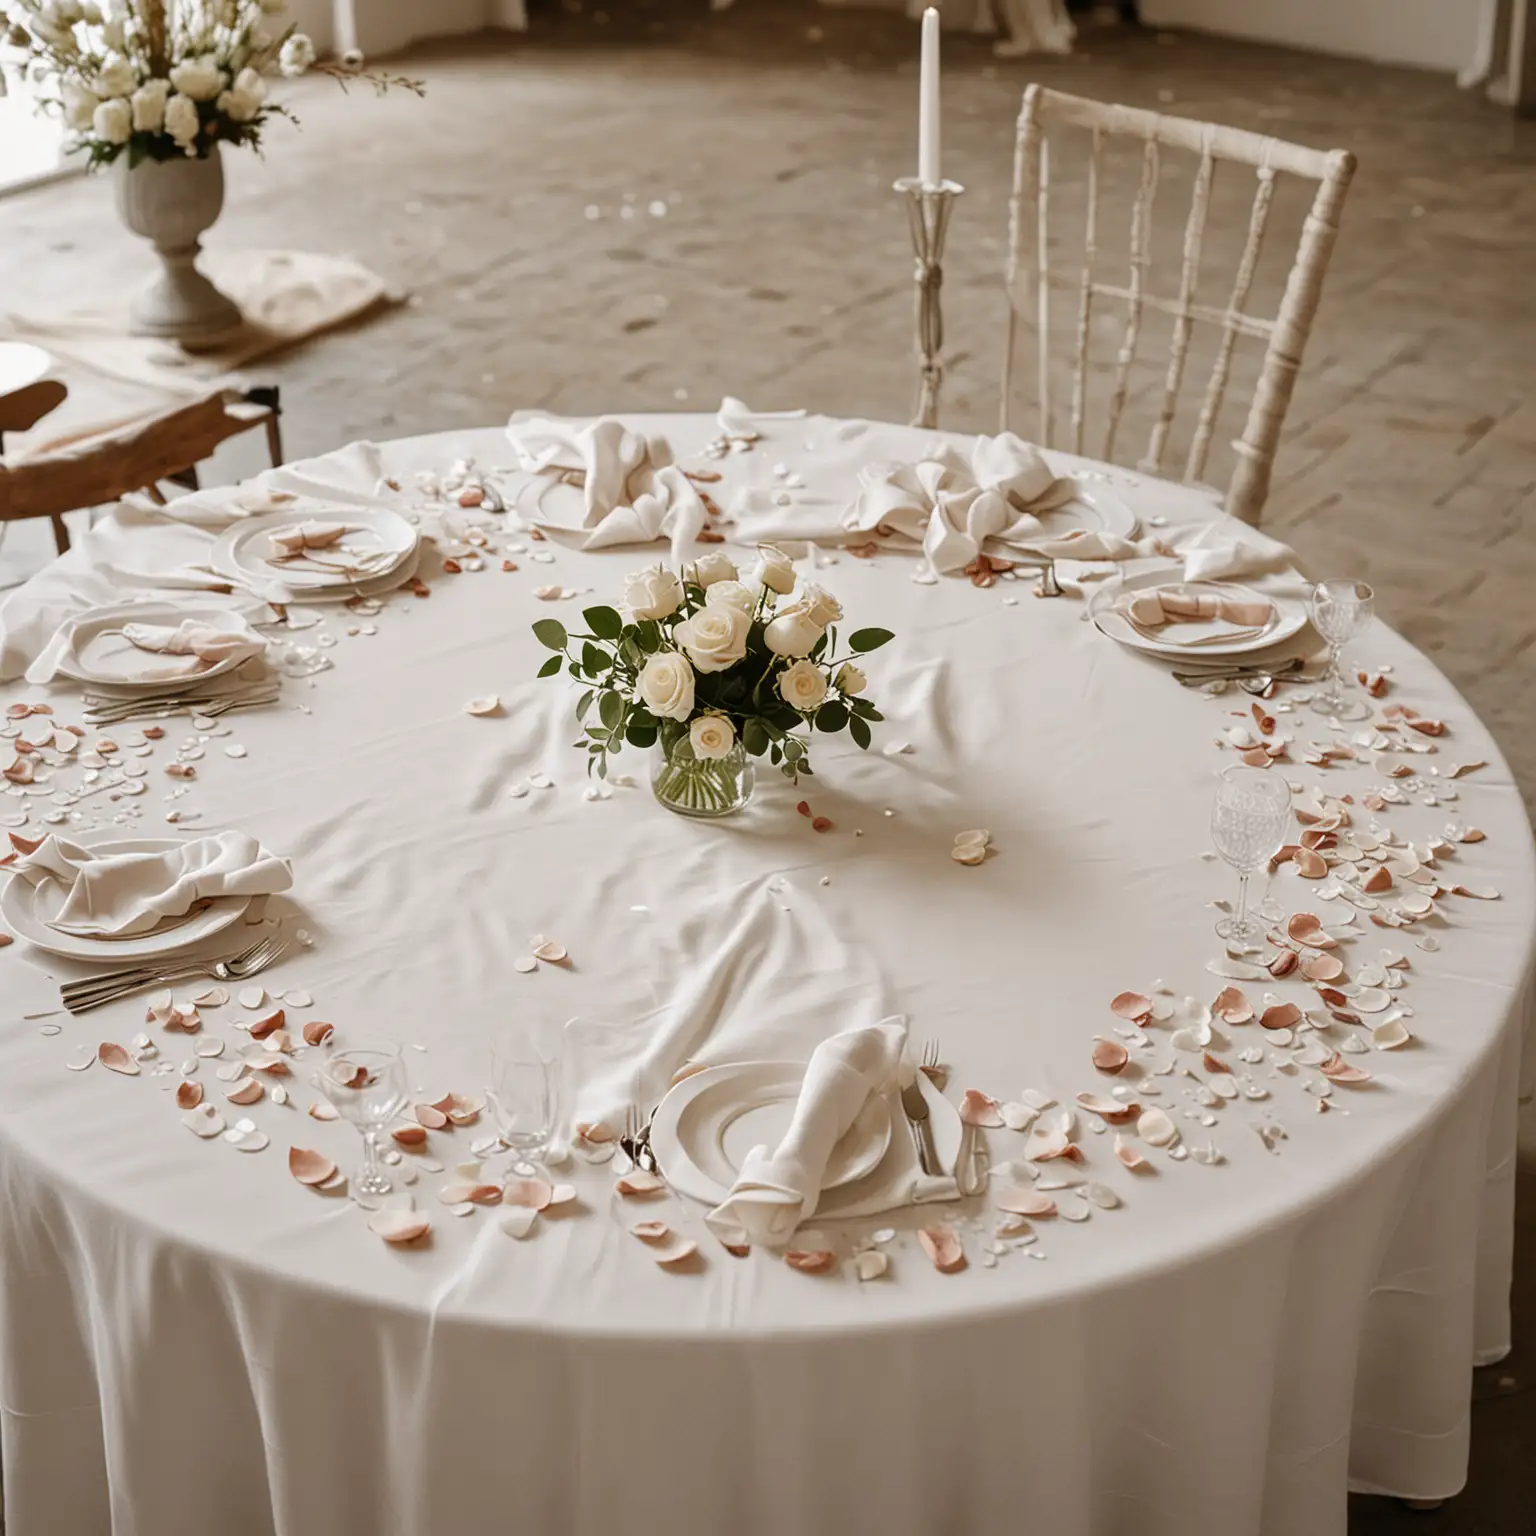 a side view of a round table set for a minimalist wedding, showing a white tablecloth with a neutral colored table runner that has white rose petals scattered delicately on top of the table runner in the center of the table